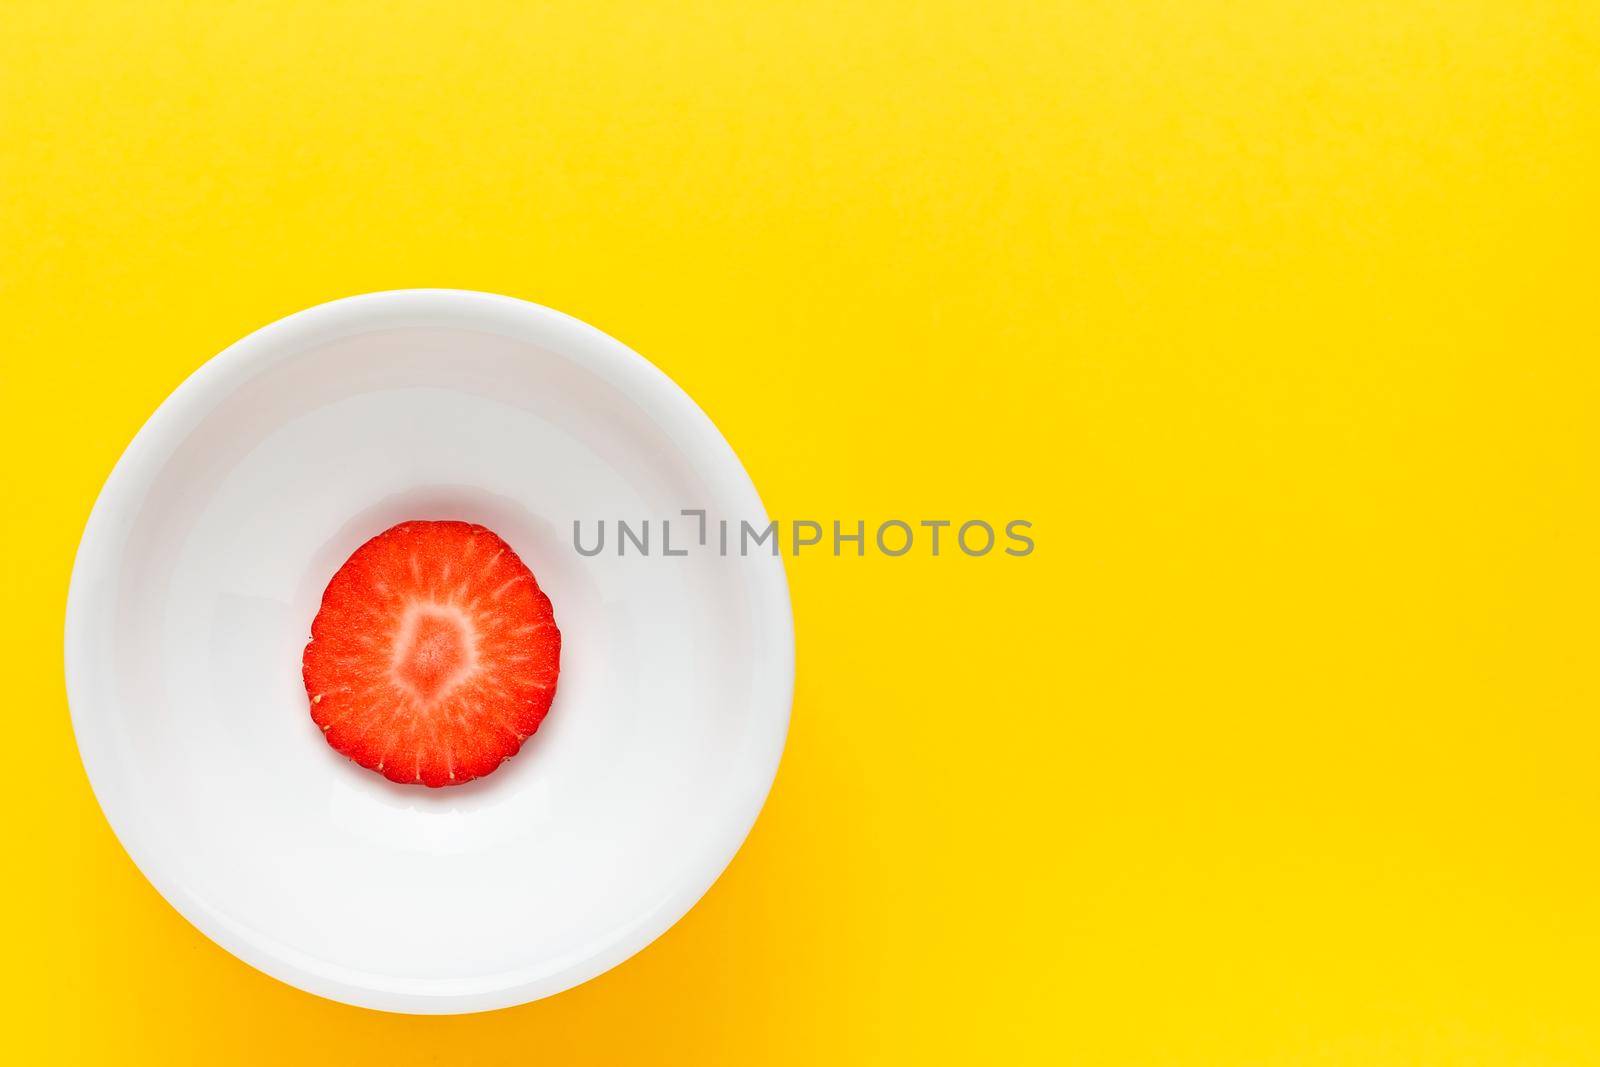 Slice of fresh strawberry on a round white plate on yellow background. Horizontal image seen from above.